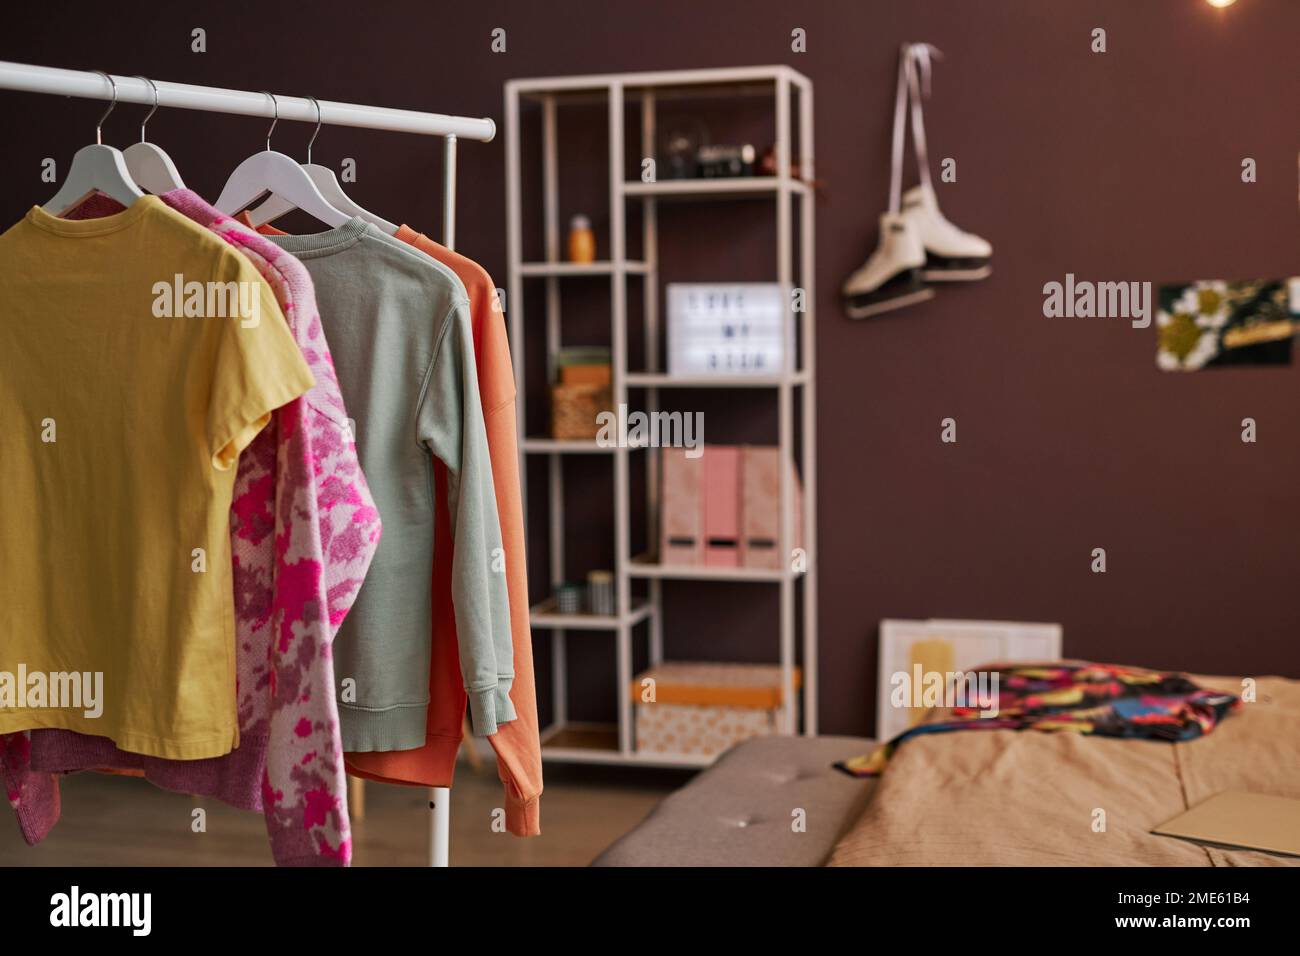 https://c8.alamy.com/comp/2ME61B4/background-image-of-open-closet-and-clothes-on-hangers-in-teenage-girls-room-copy-space-2ME61B4.jpg